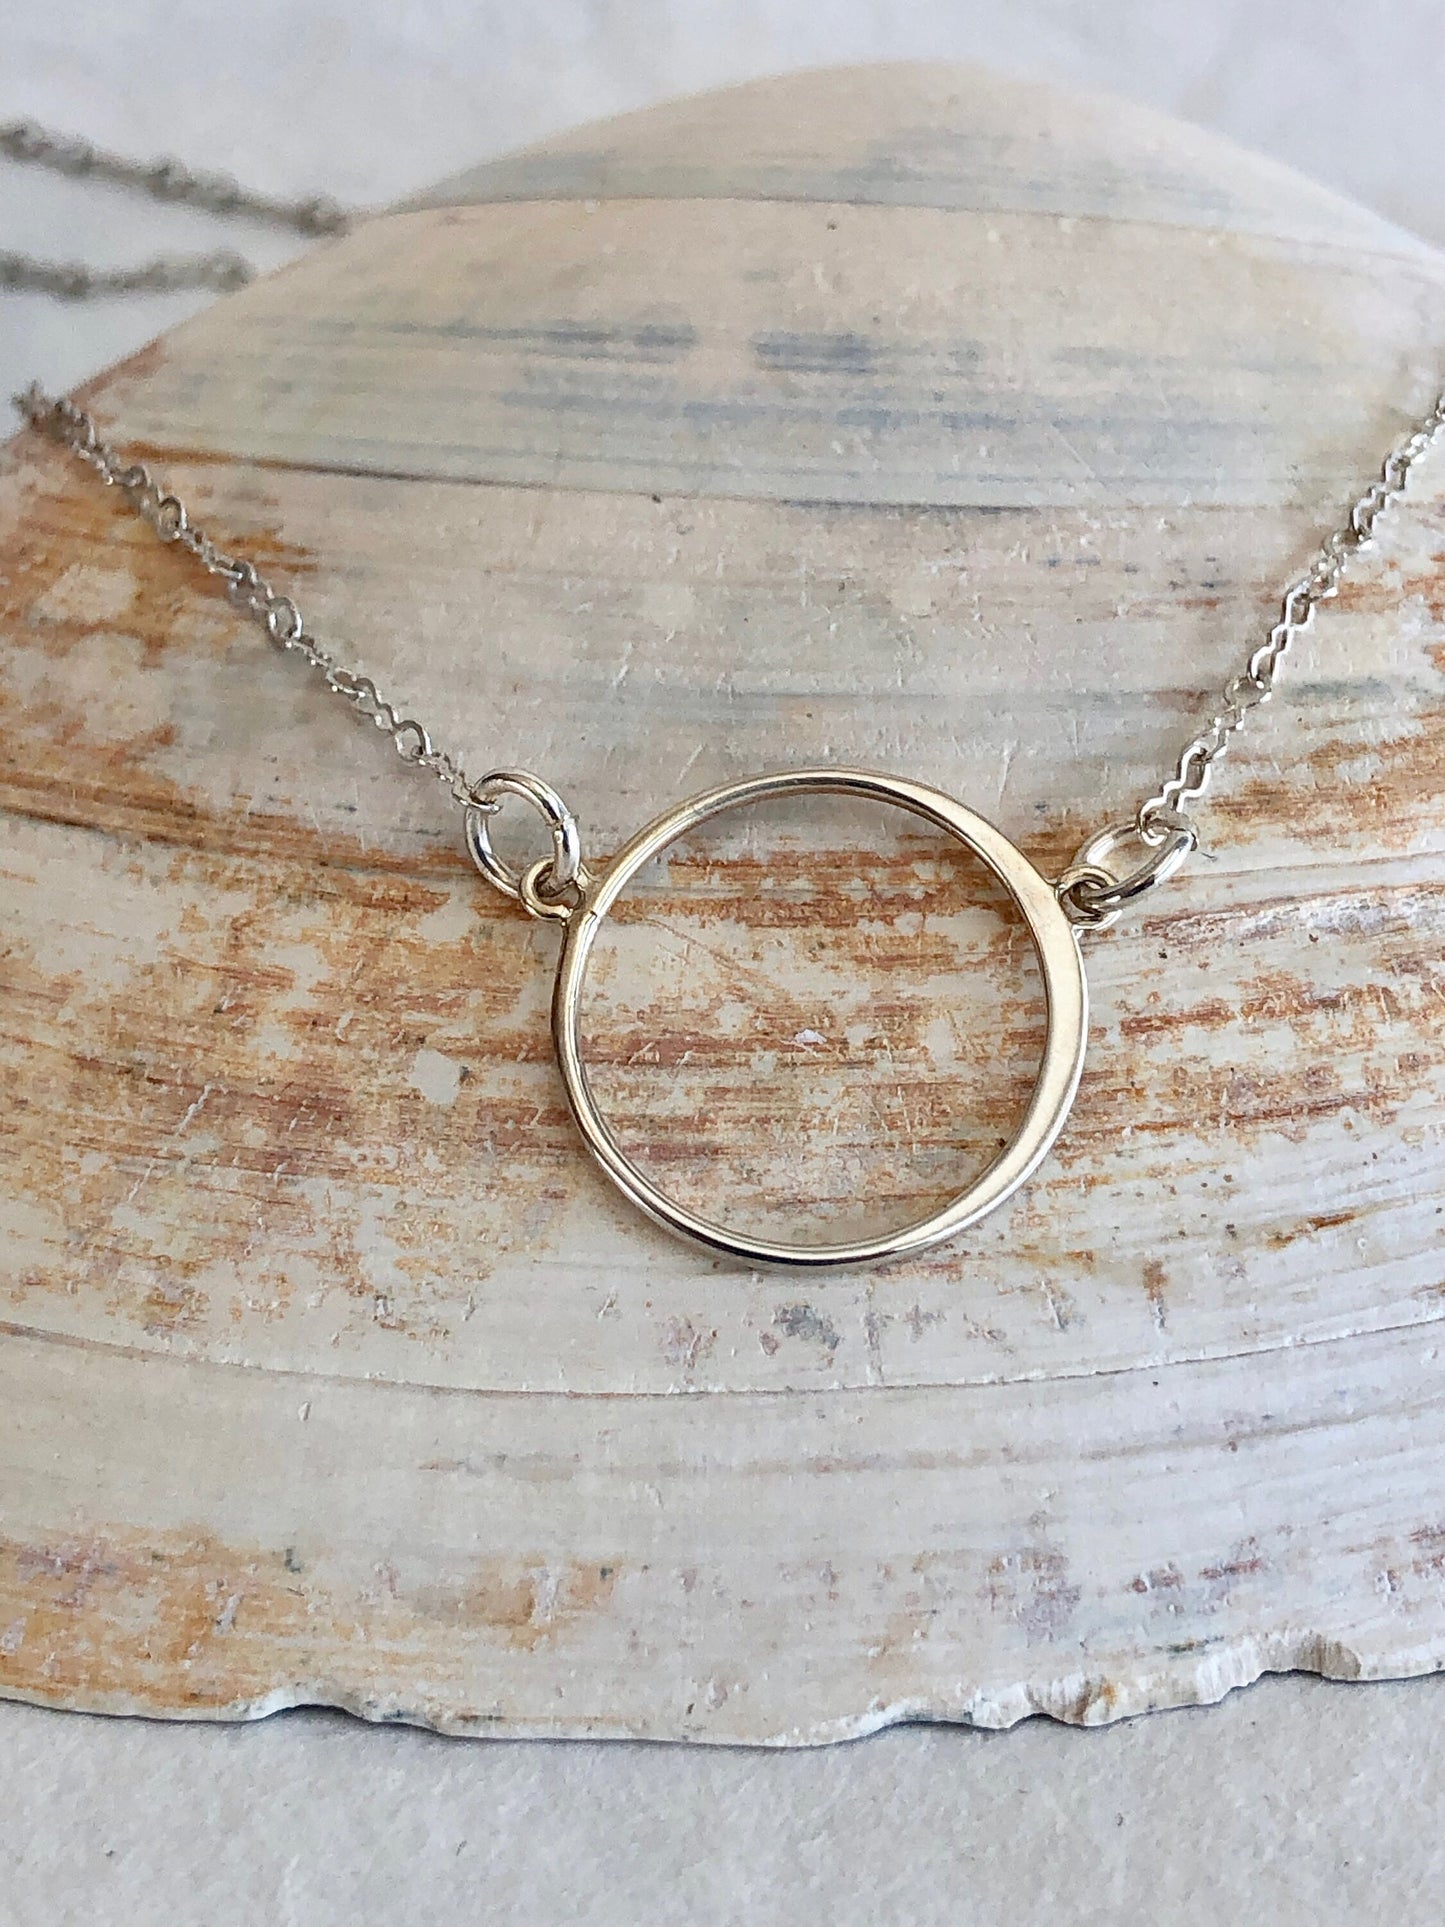 Sterling silver circle pendant. Strung on quality sterling silver chain. Beautiful graduation gift.